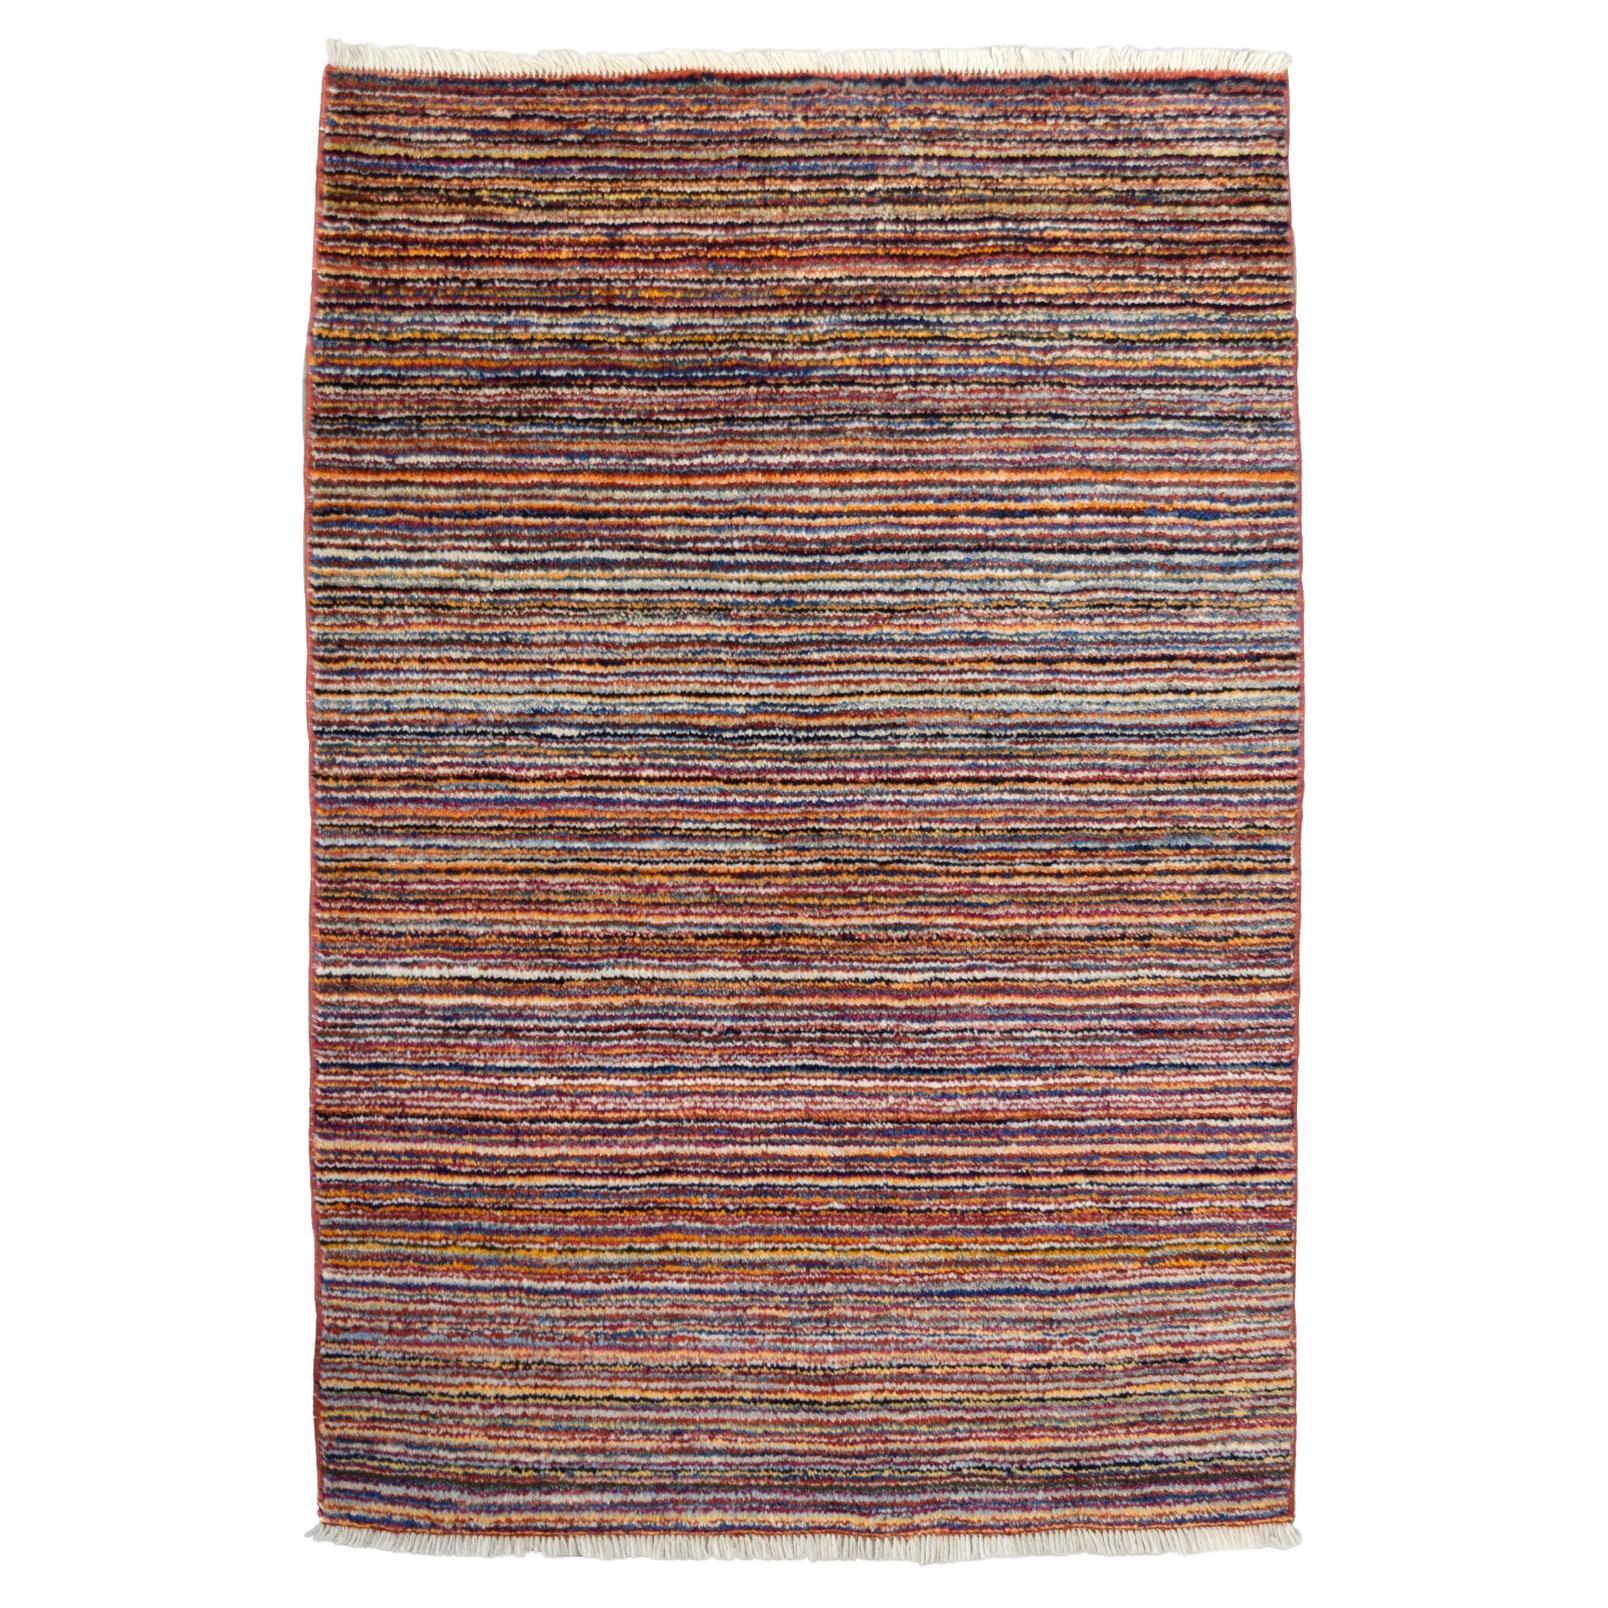 Persian Shekarloo Striped Rug, Red with Multicolor, 3' x 4'